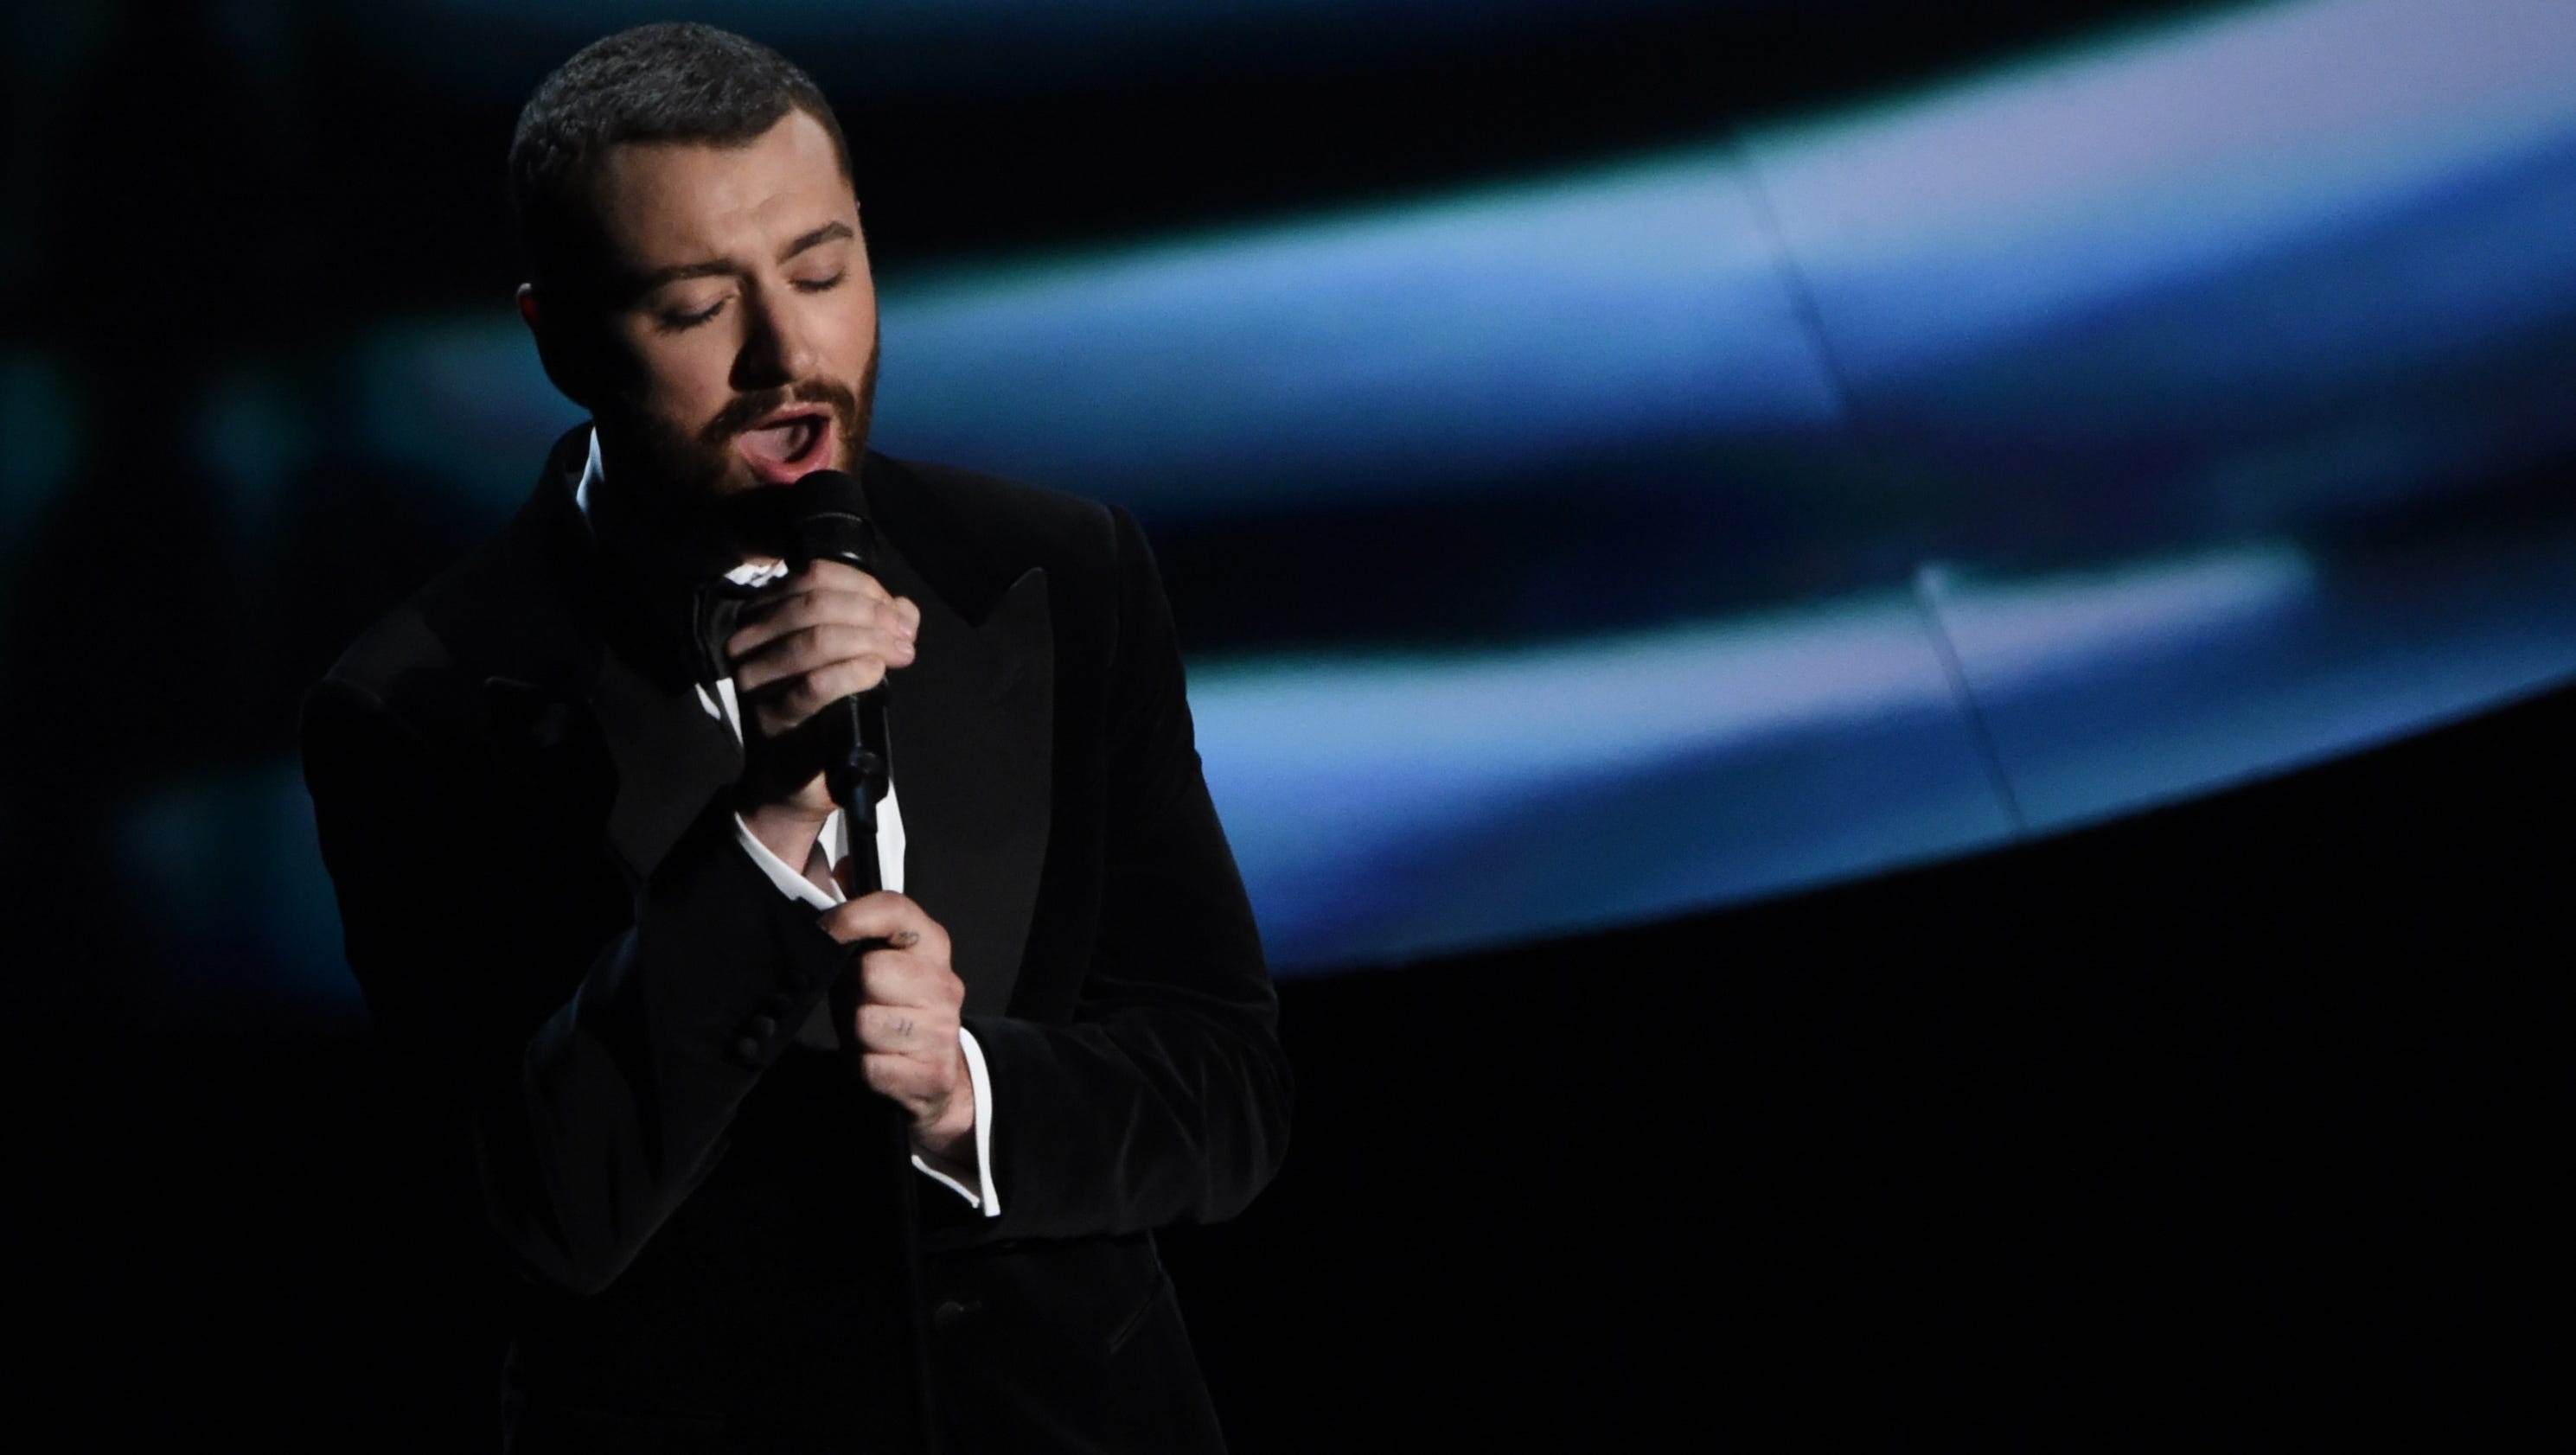 Sam Smith's emotional 'Too Good At Goodbyes' music video is here